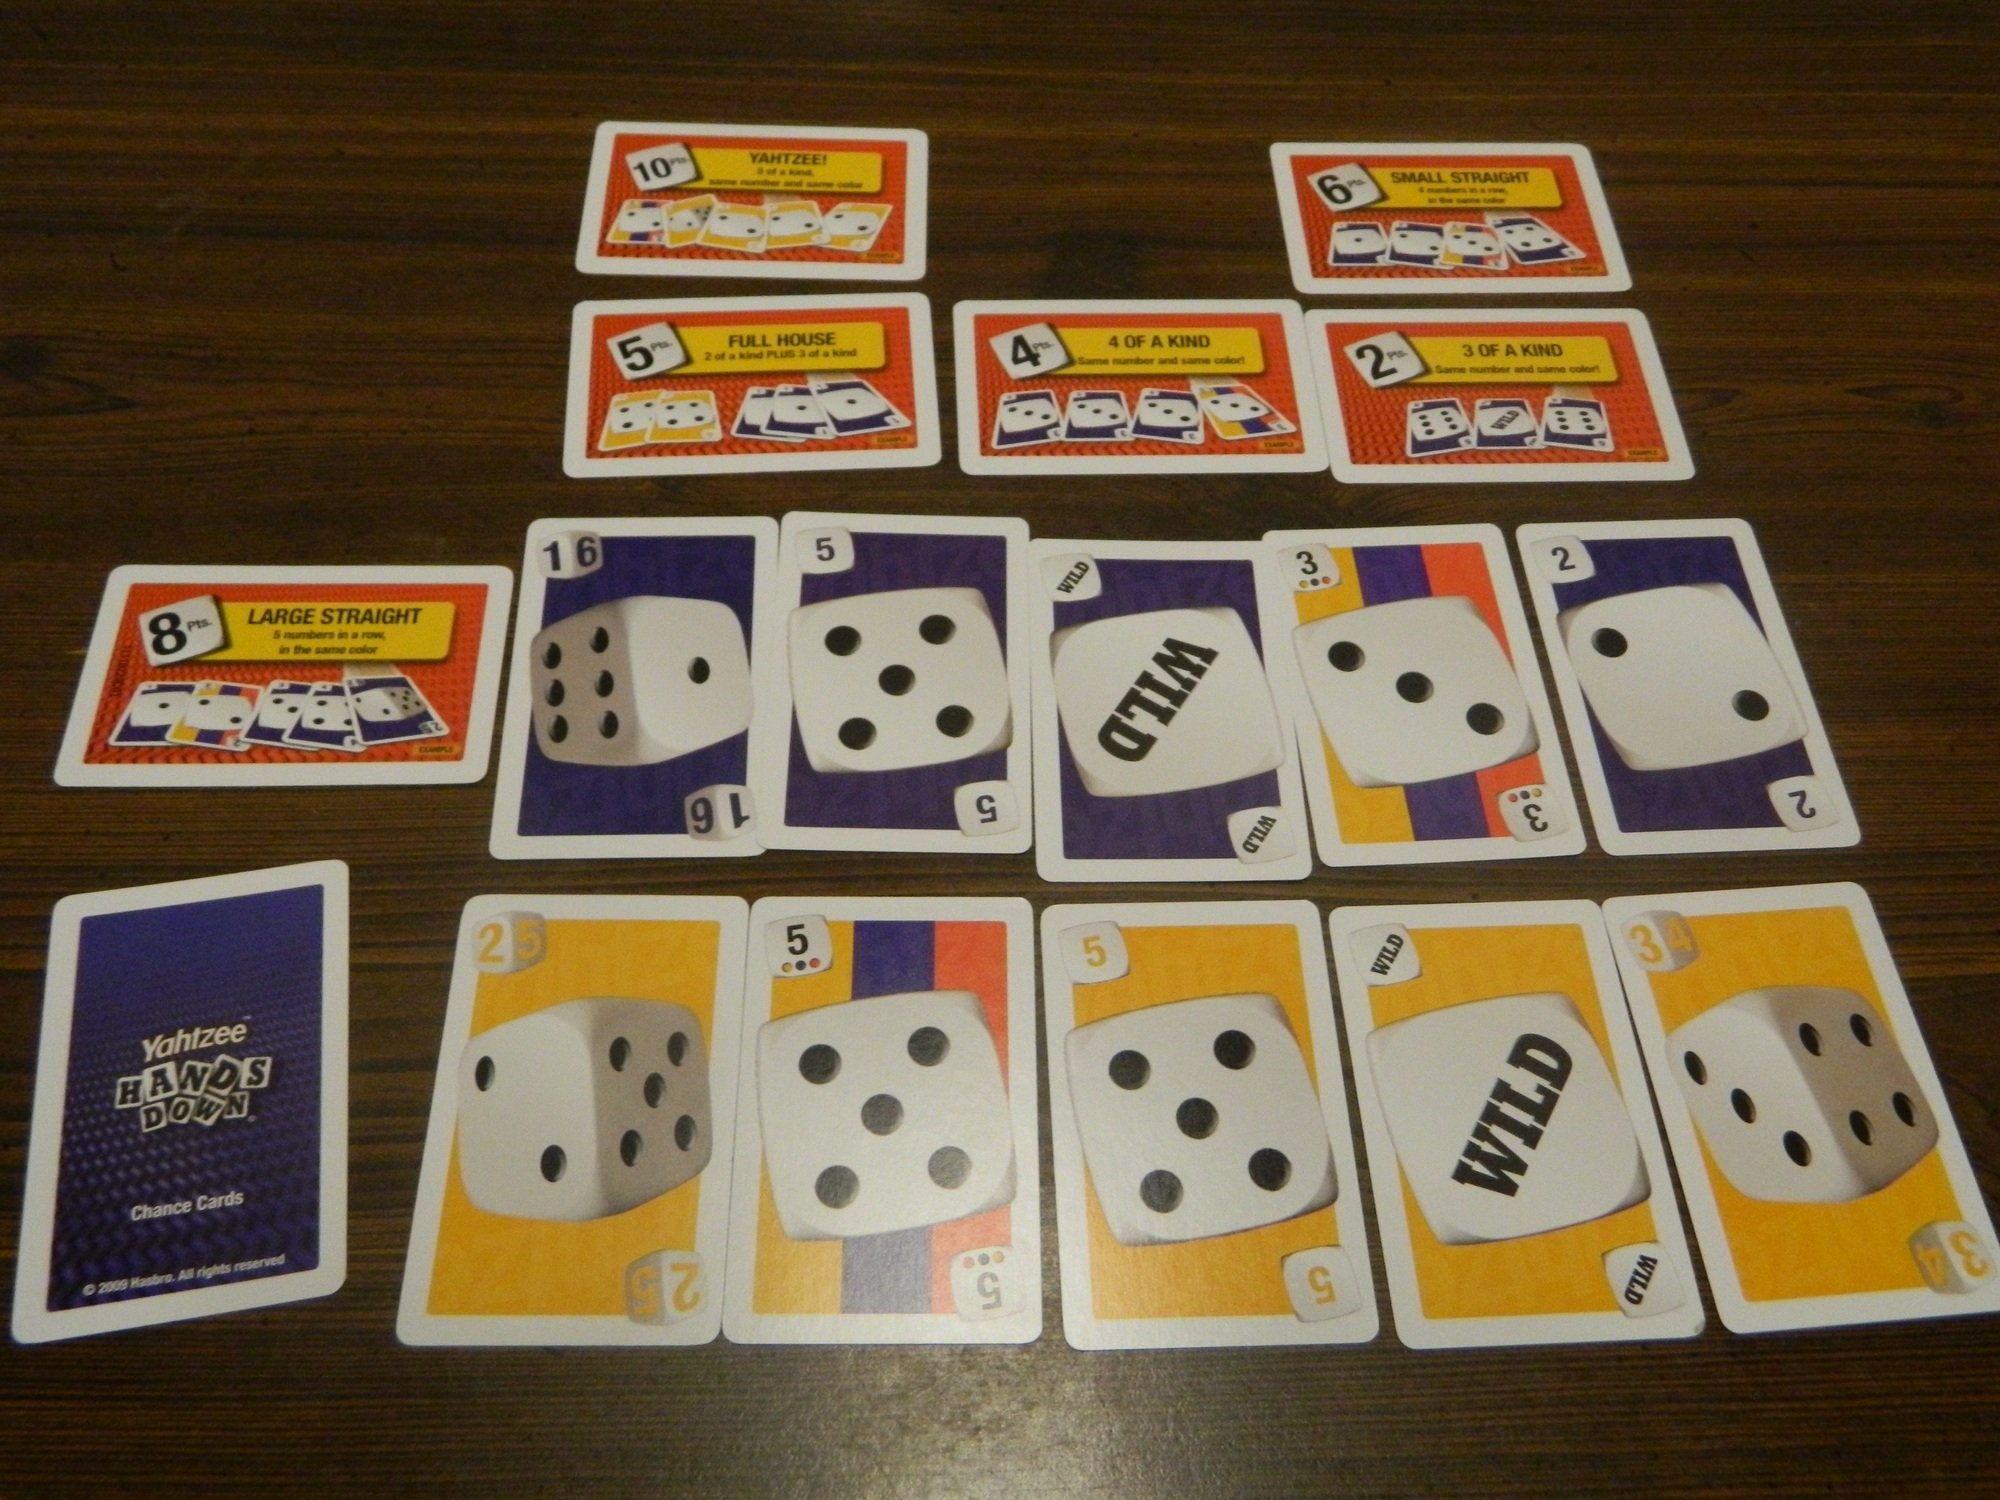 Yahtzee Hands Down Family Card Game By Hasbro May the Bast hand Win NEW 